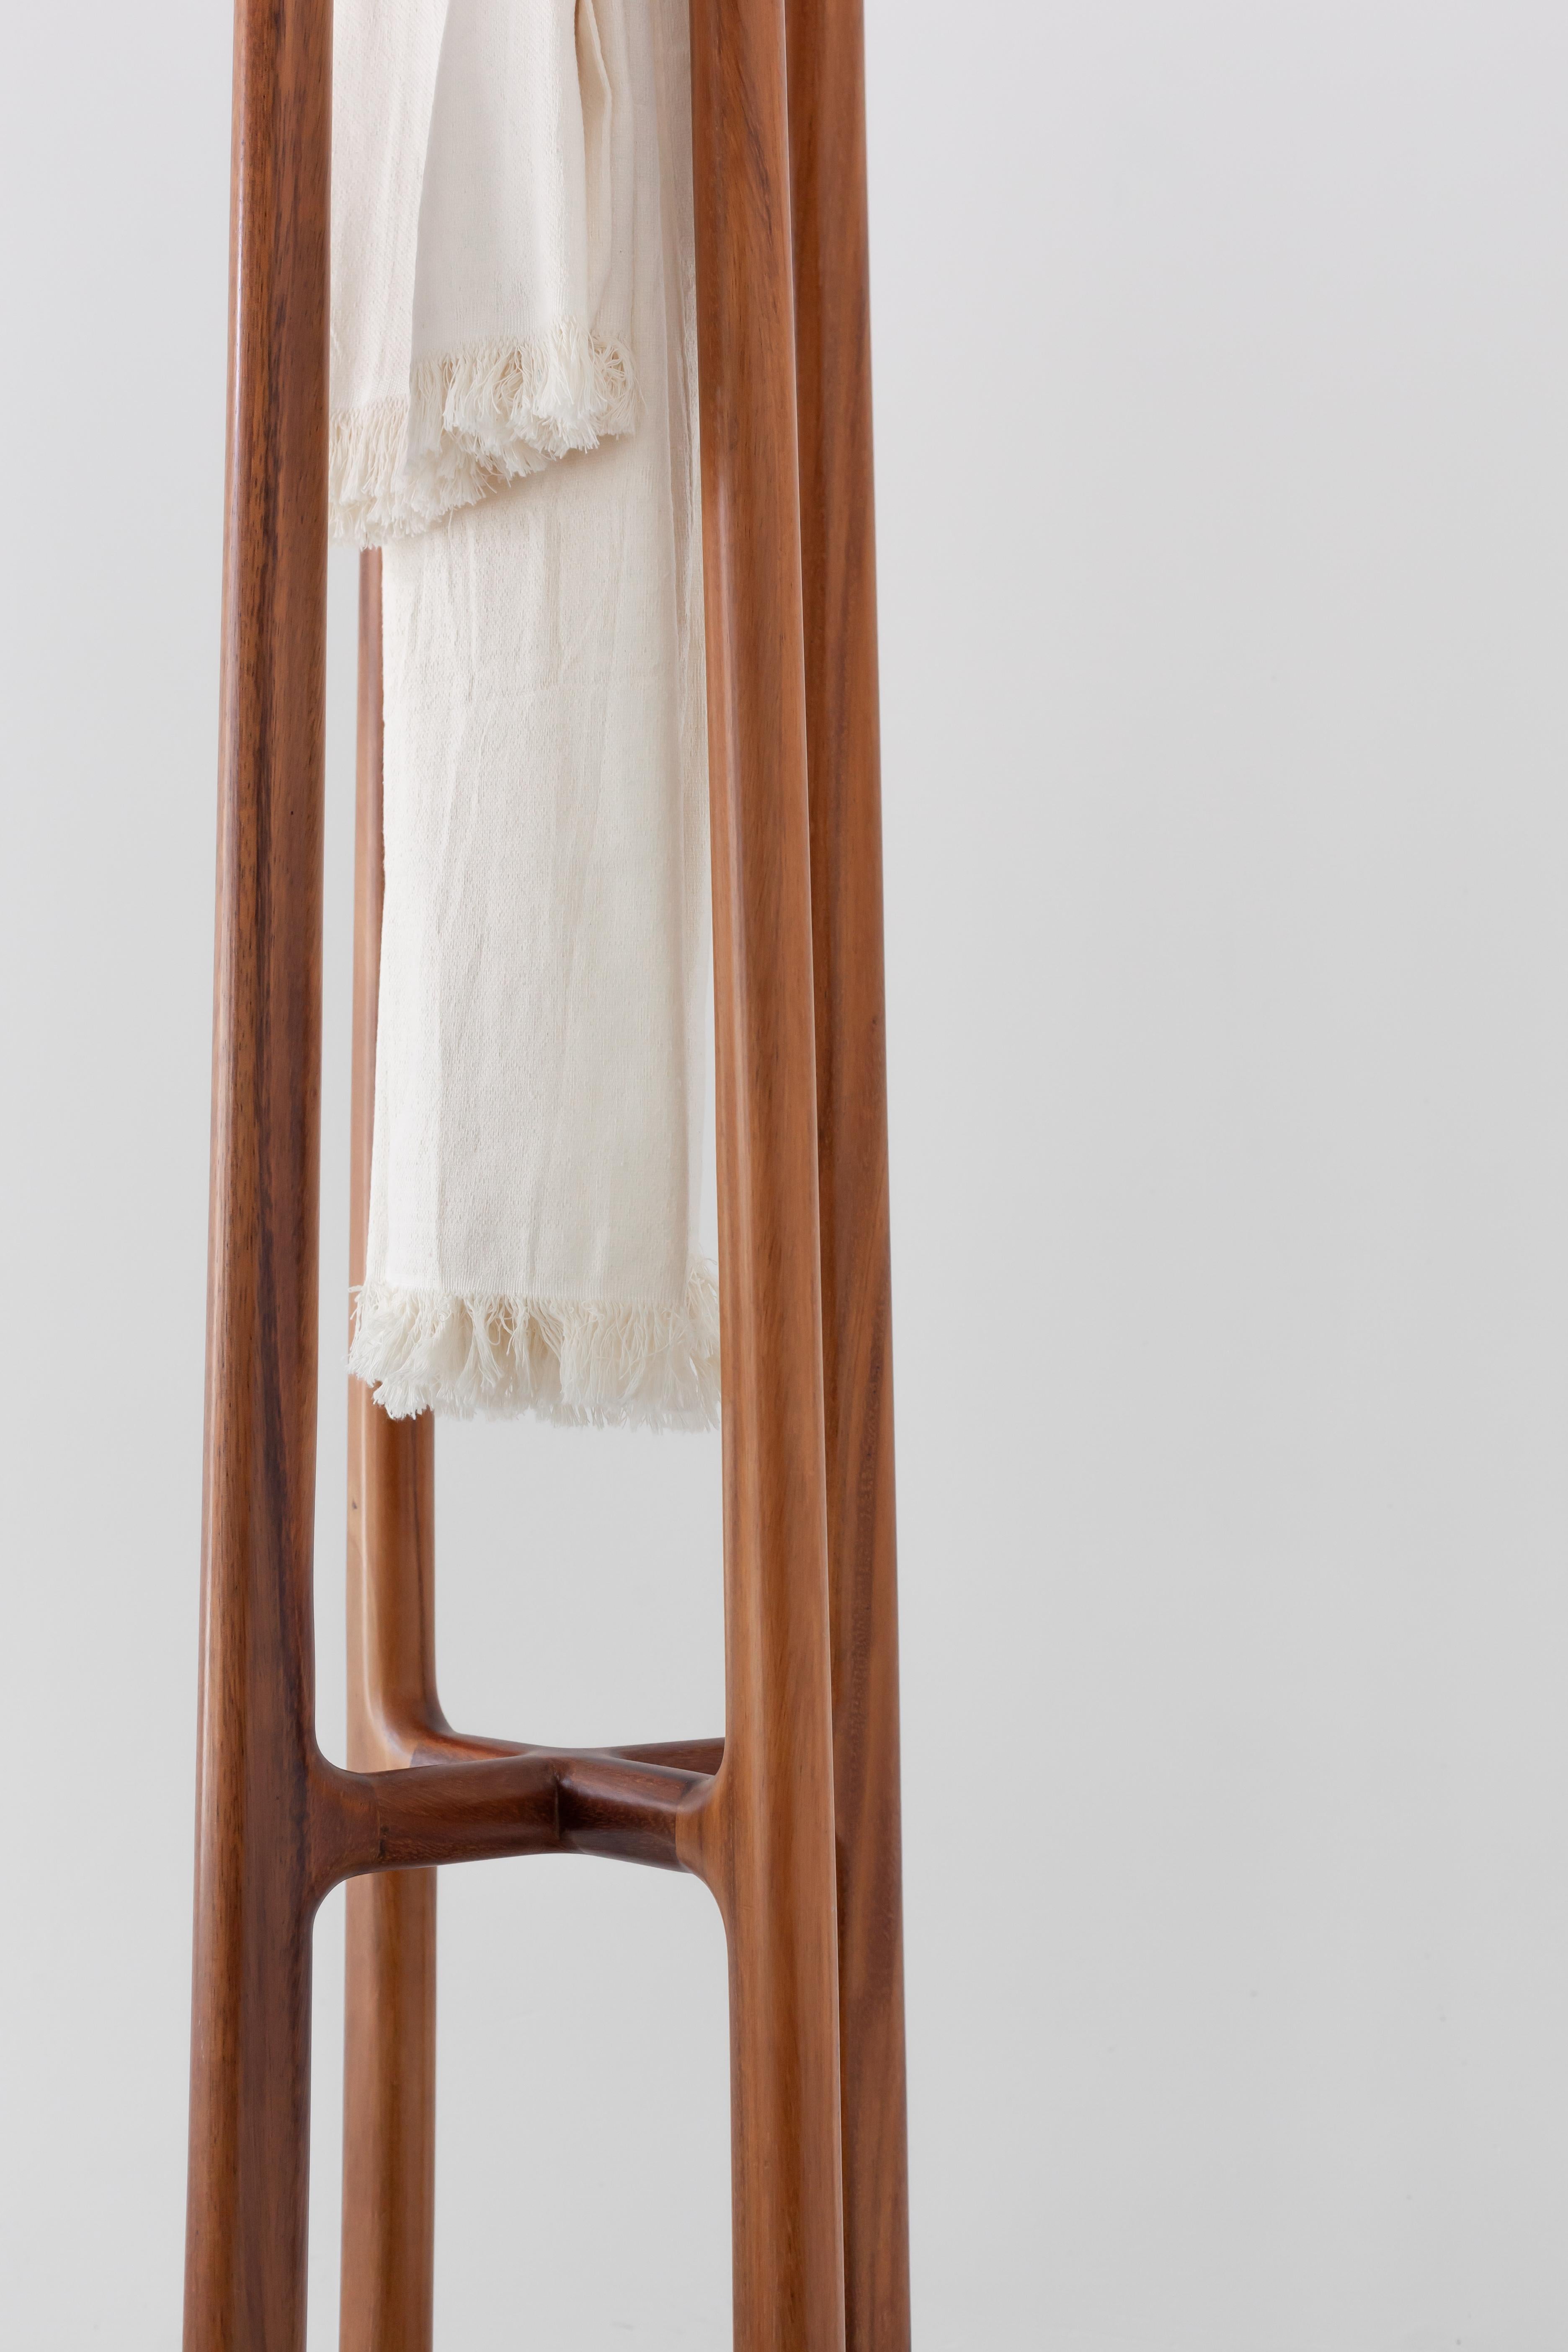 Desierto 170, Tropical Hardwood Coat Stand, Contemporary Mexican Design In New Condition For Sale In Mexico City, MX